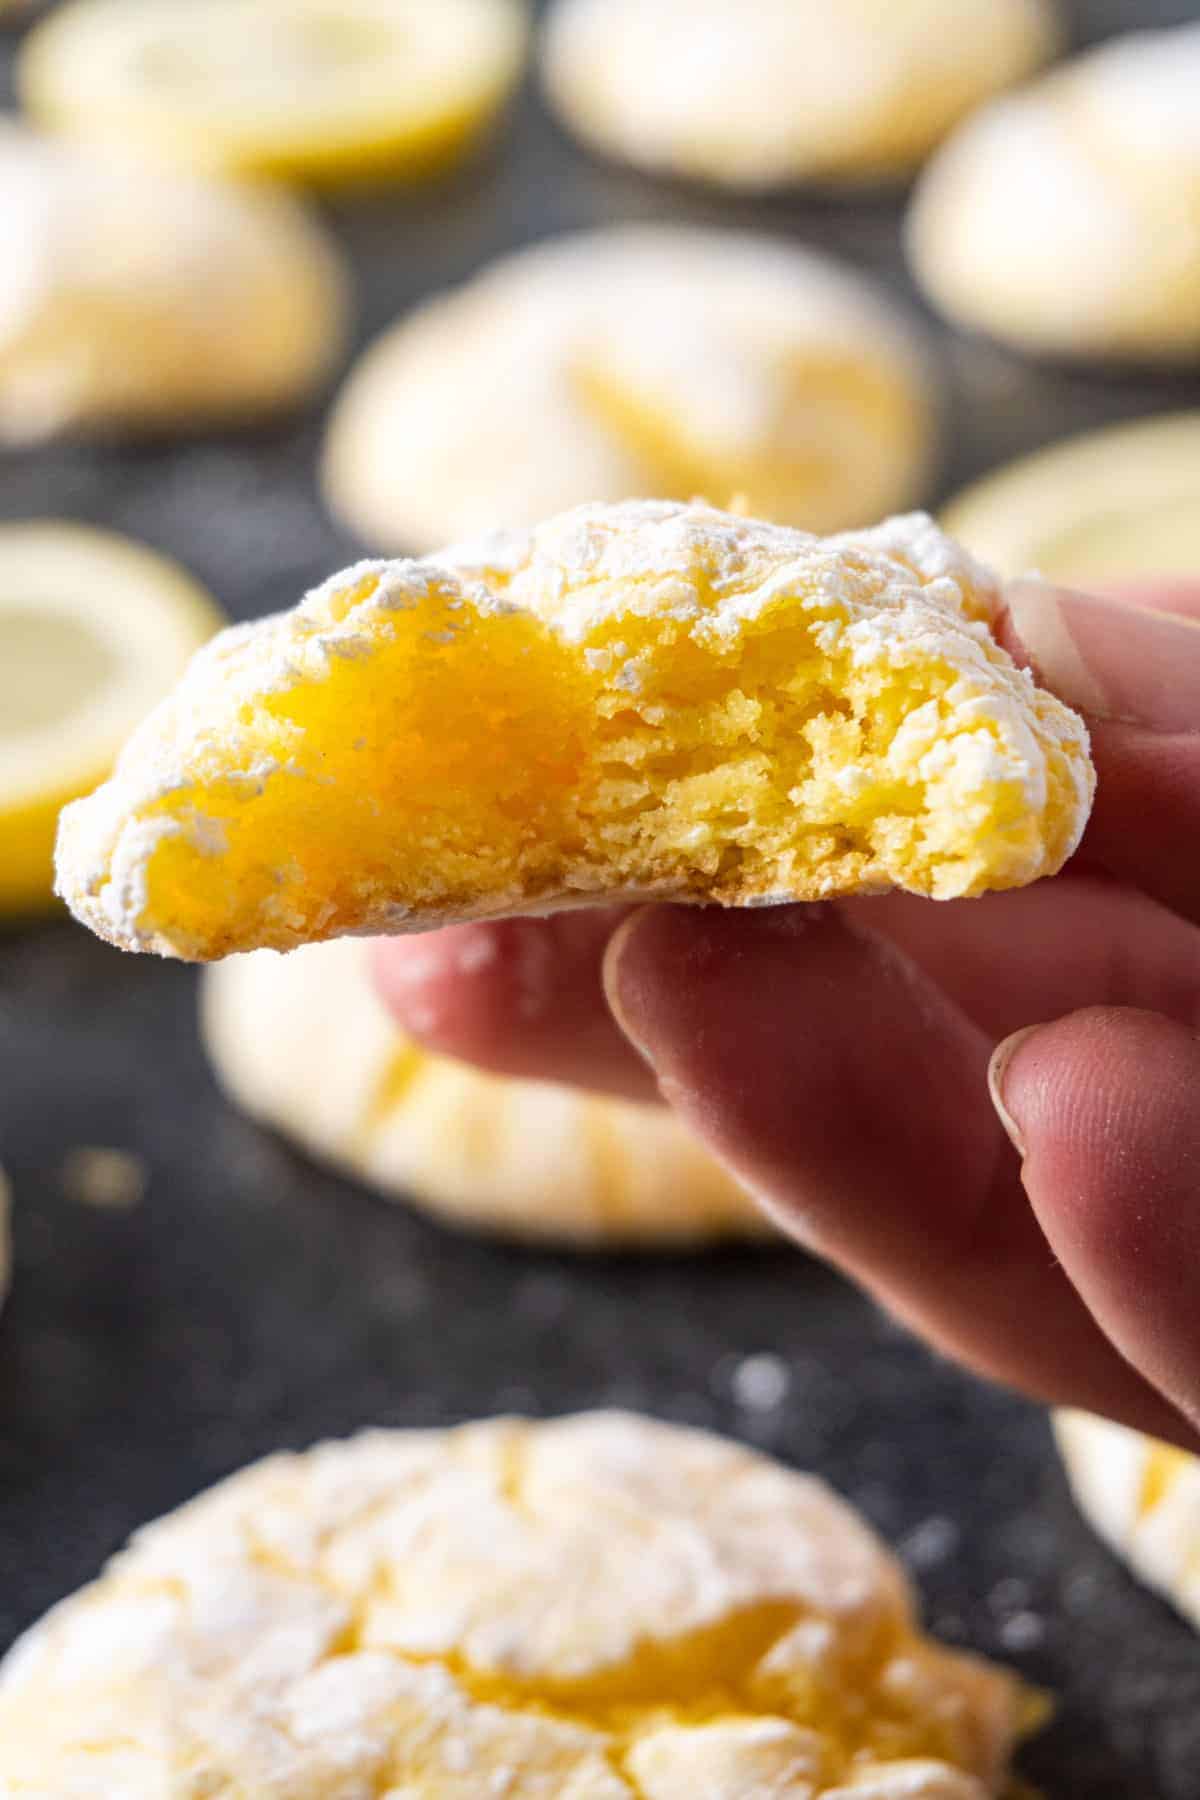 Lemon cookie with bite taken out of it